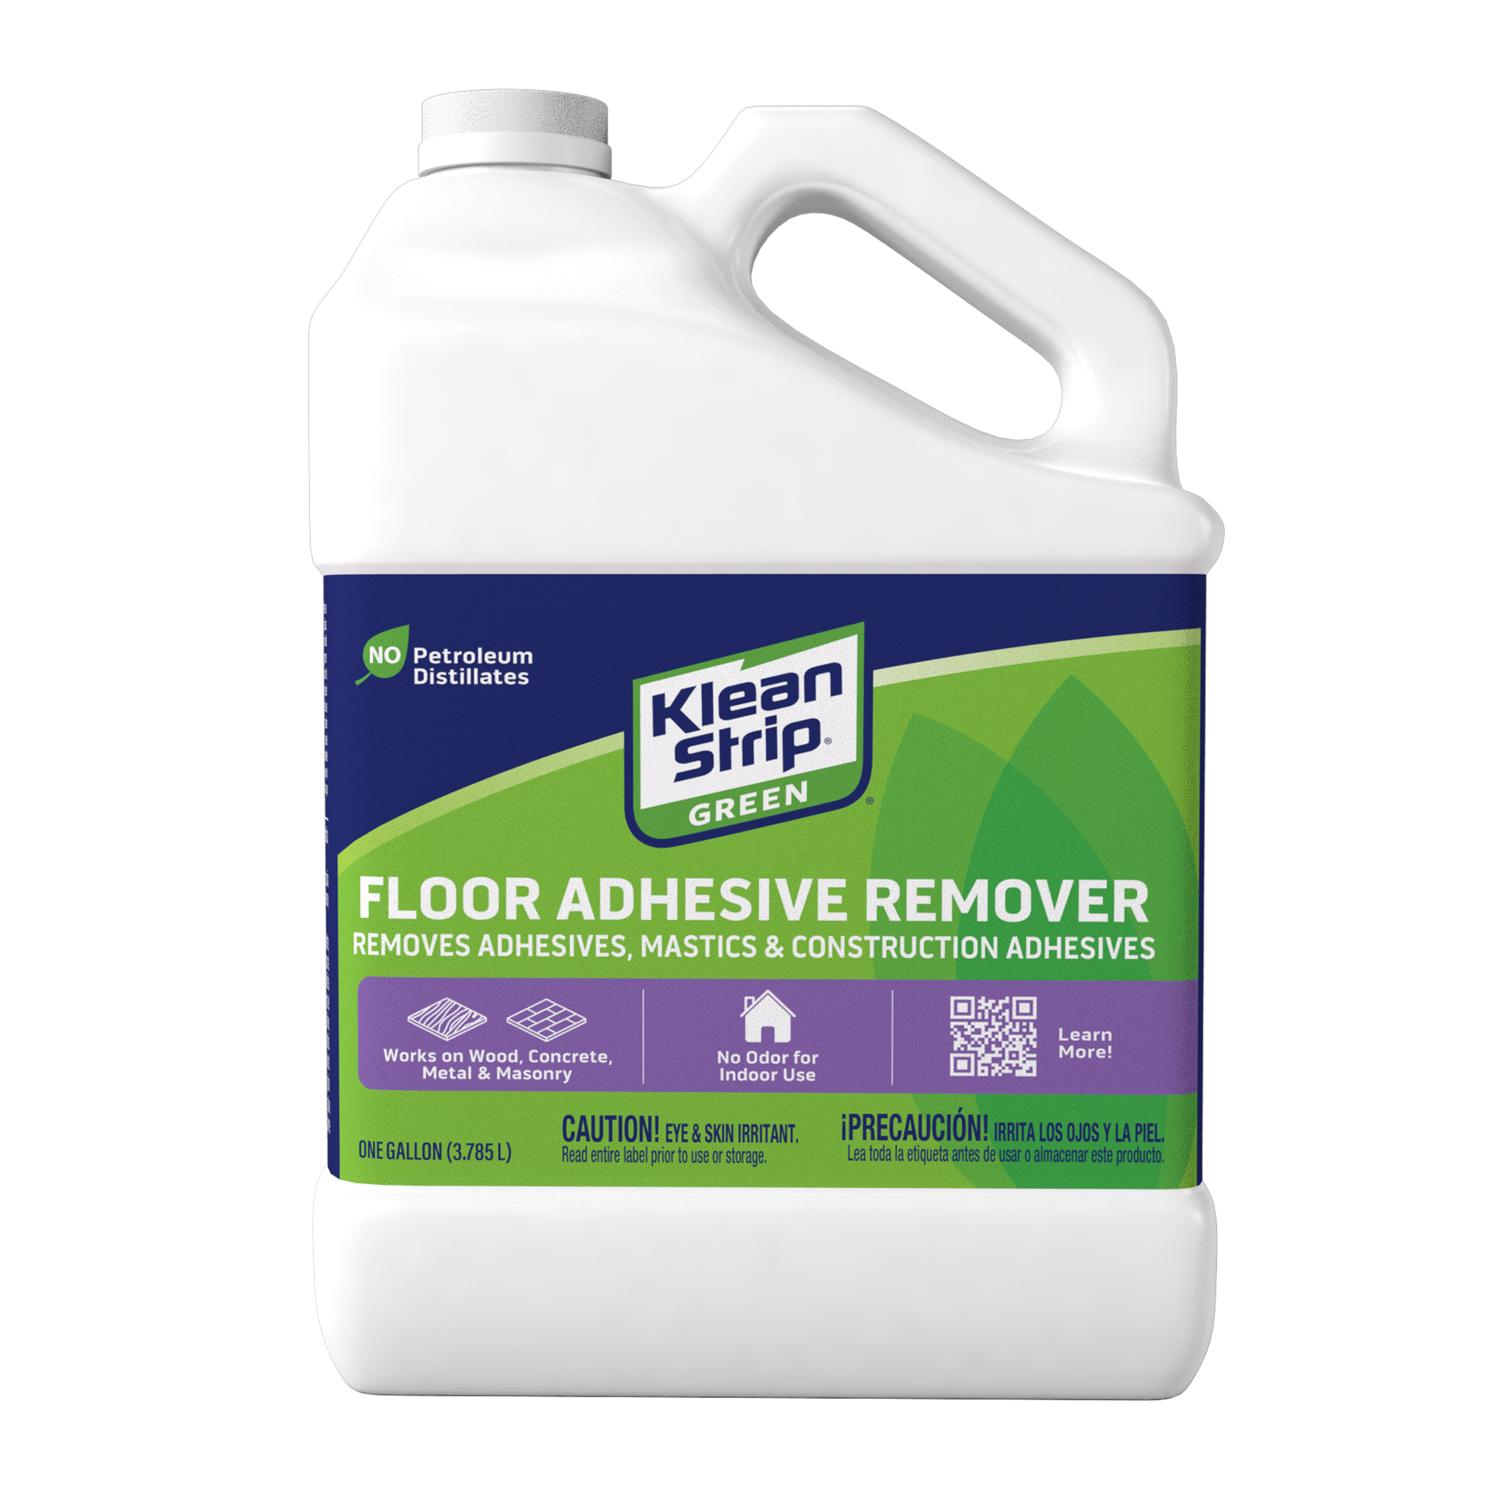 Boat Adhesive Residue Removal Tip